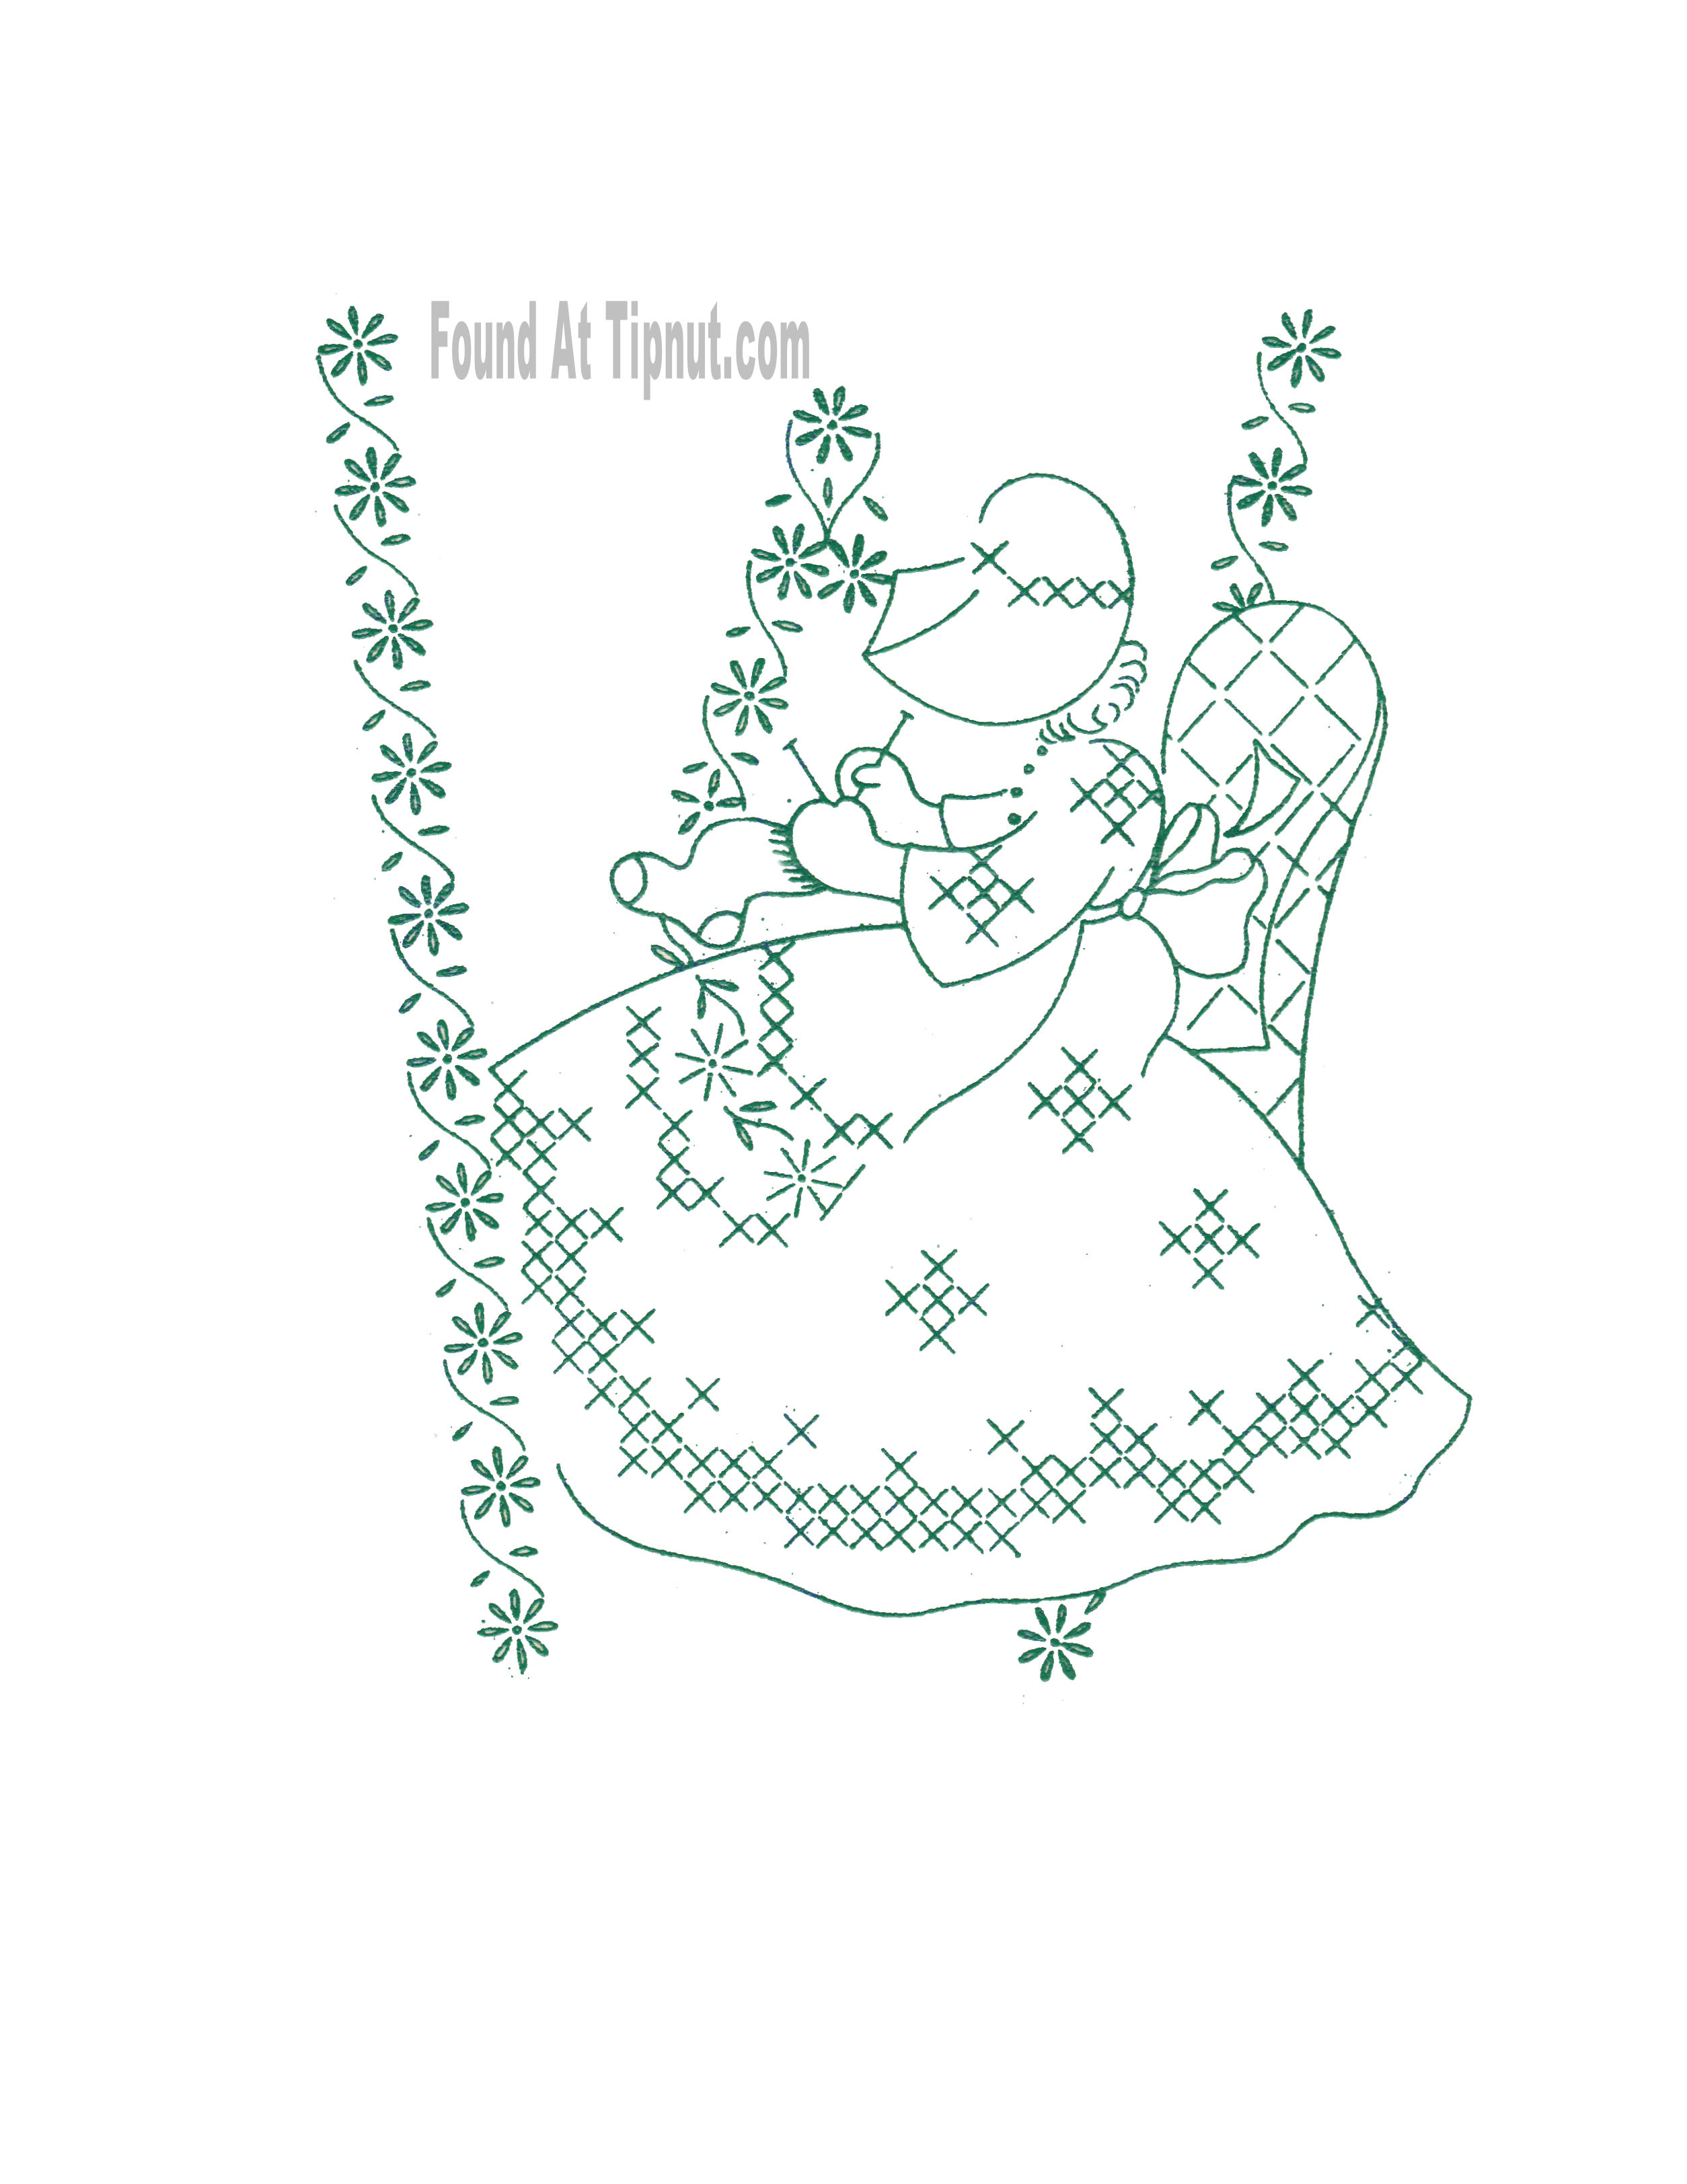 Sunbonnet Sue Embroidery Patterns Sunbonnet Gal Days Of The Week Embroidery Tipnut